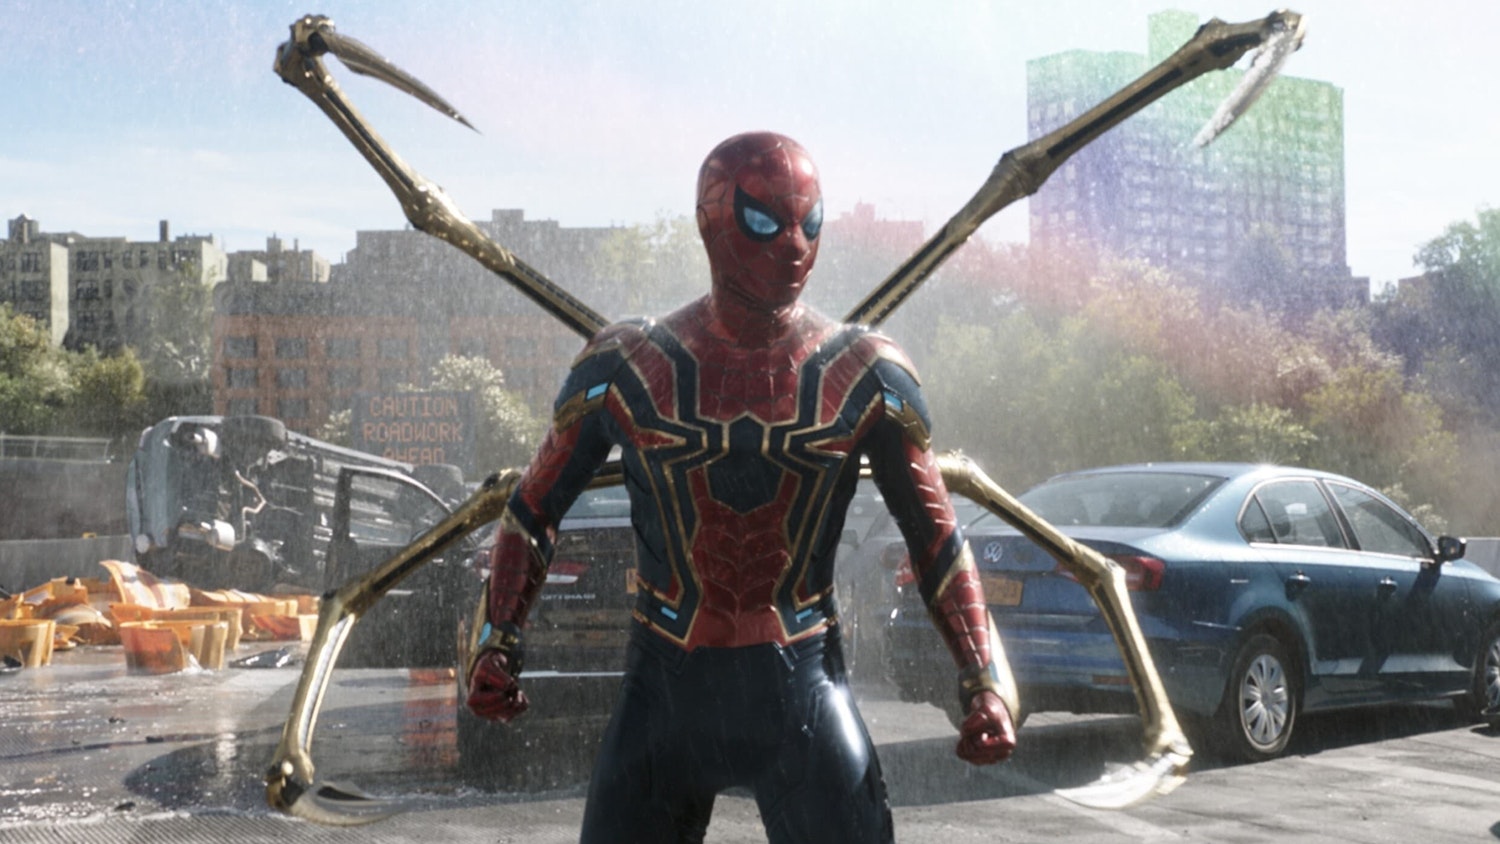 Sony Releasing New More Fun Stuff Version of SPIDER-MAN: NO WAY